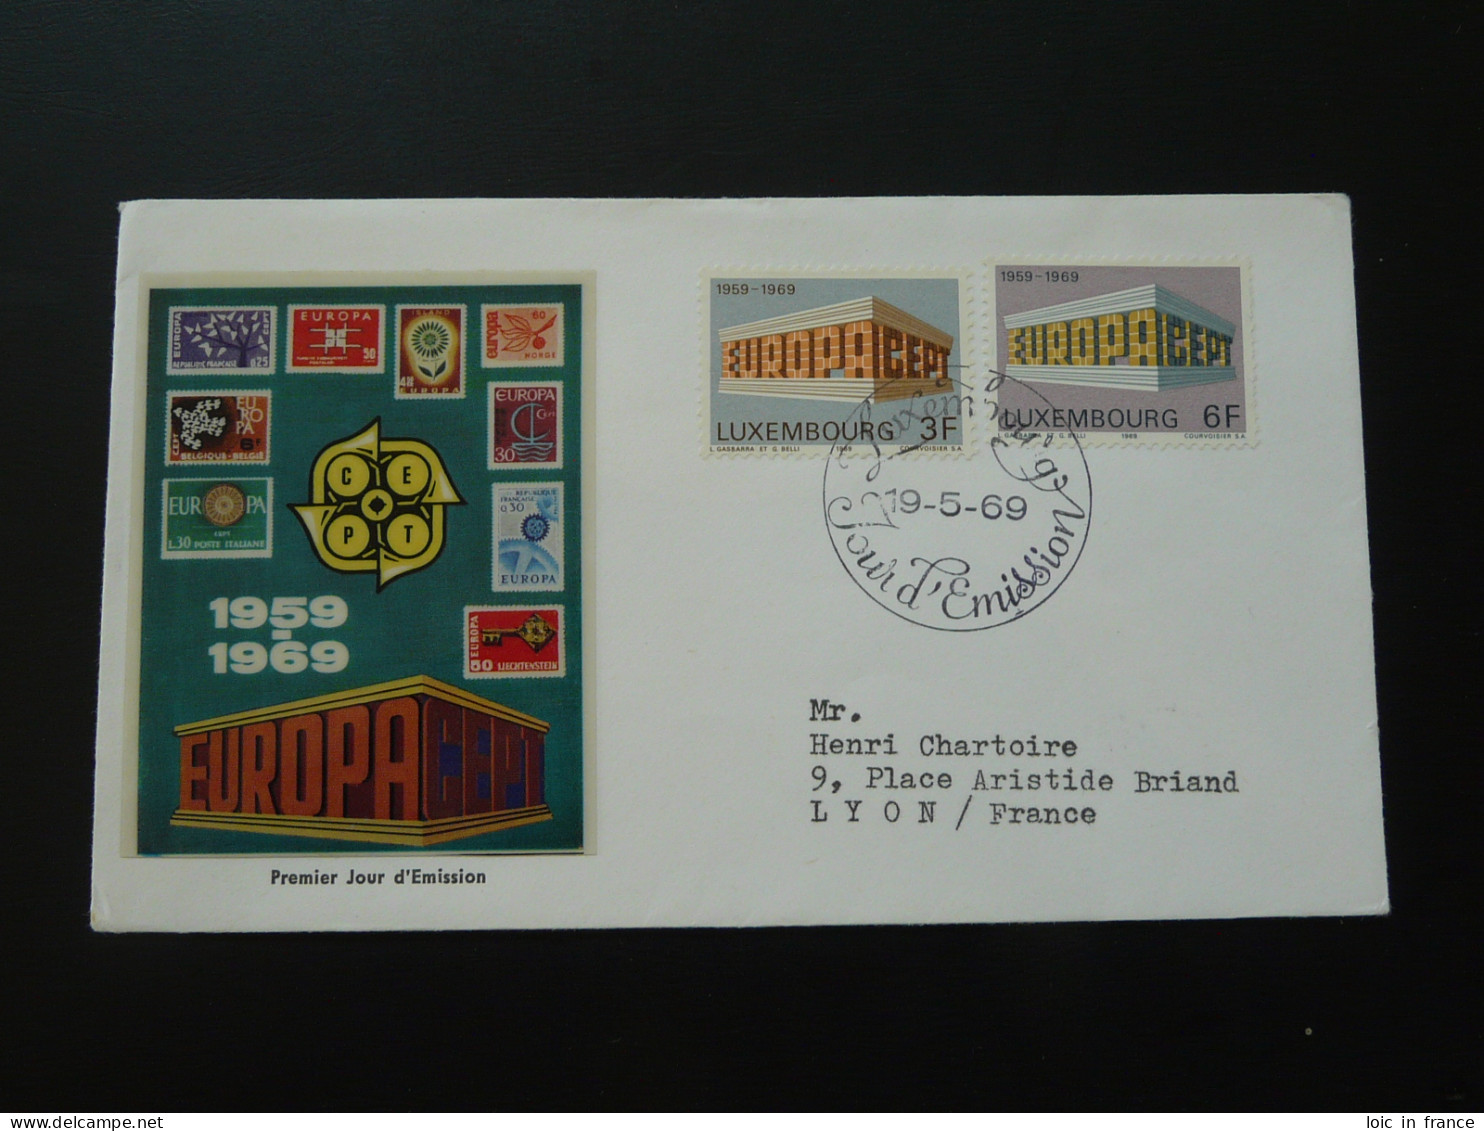 FDC Europa Cept Luxembourg 1969 - FDC